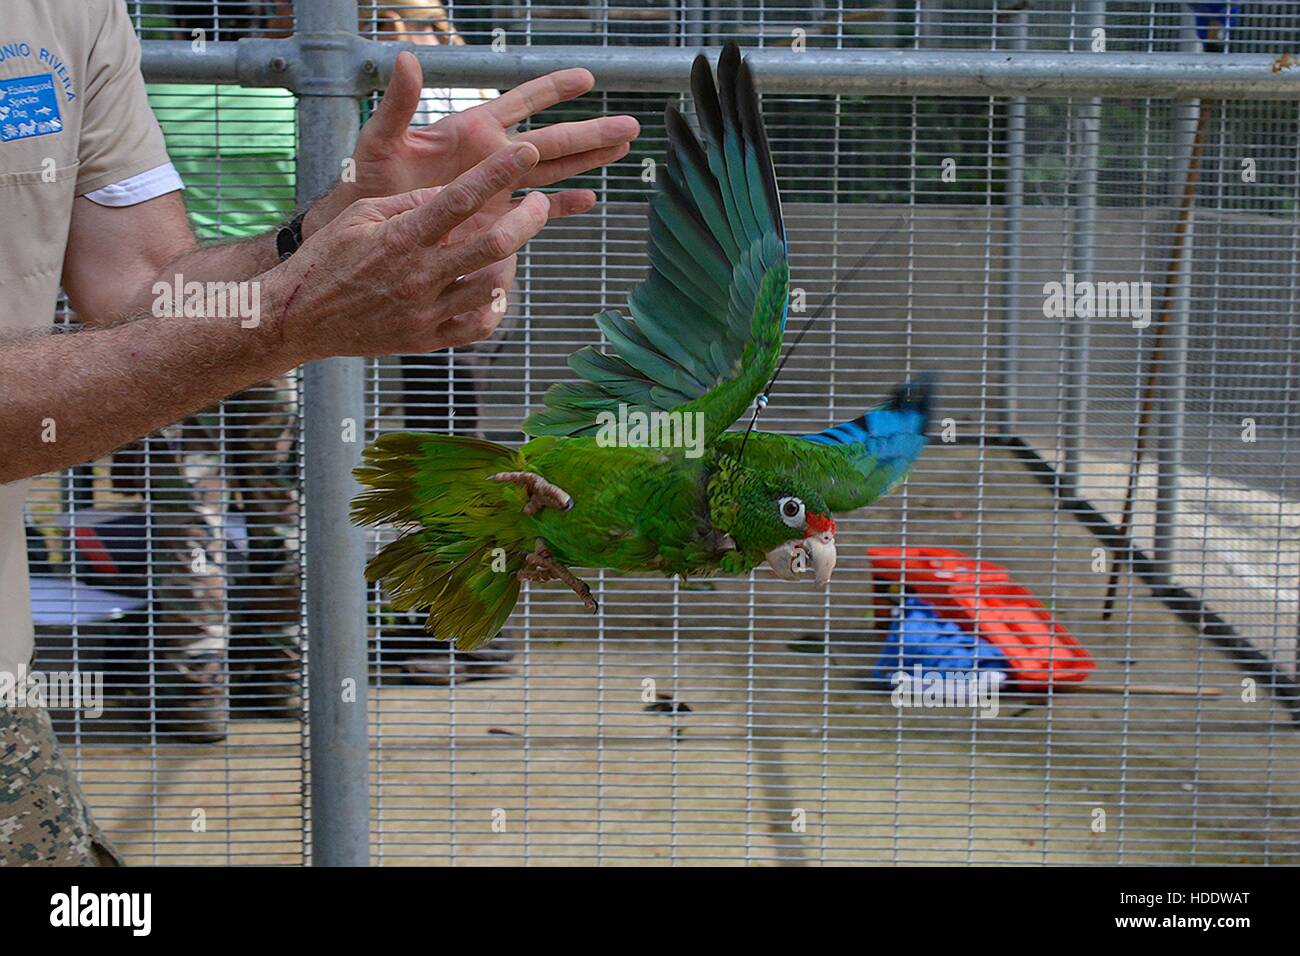 A Puerto Rican Amazon parrot flies out its handlers hands in a cage prior to release at the Maricao State Forest November 23, 2016 in Maricao, Puerto Rico. Stock Photo